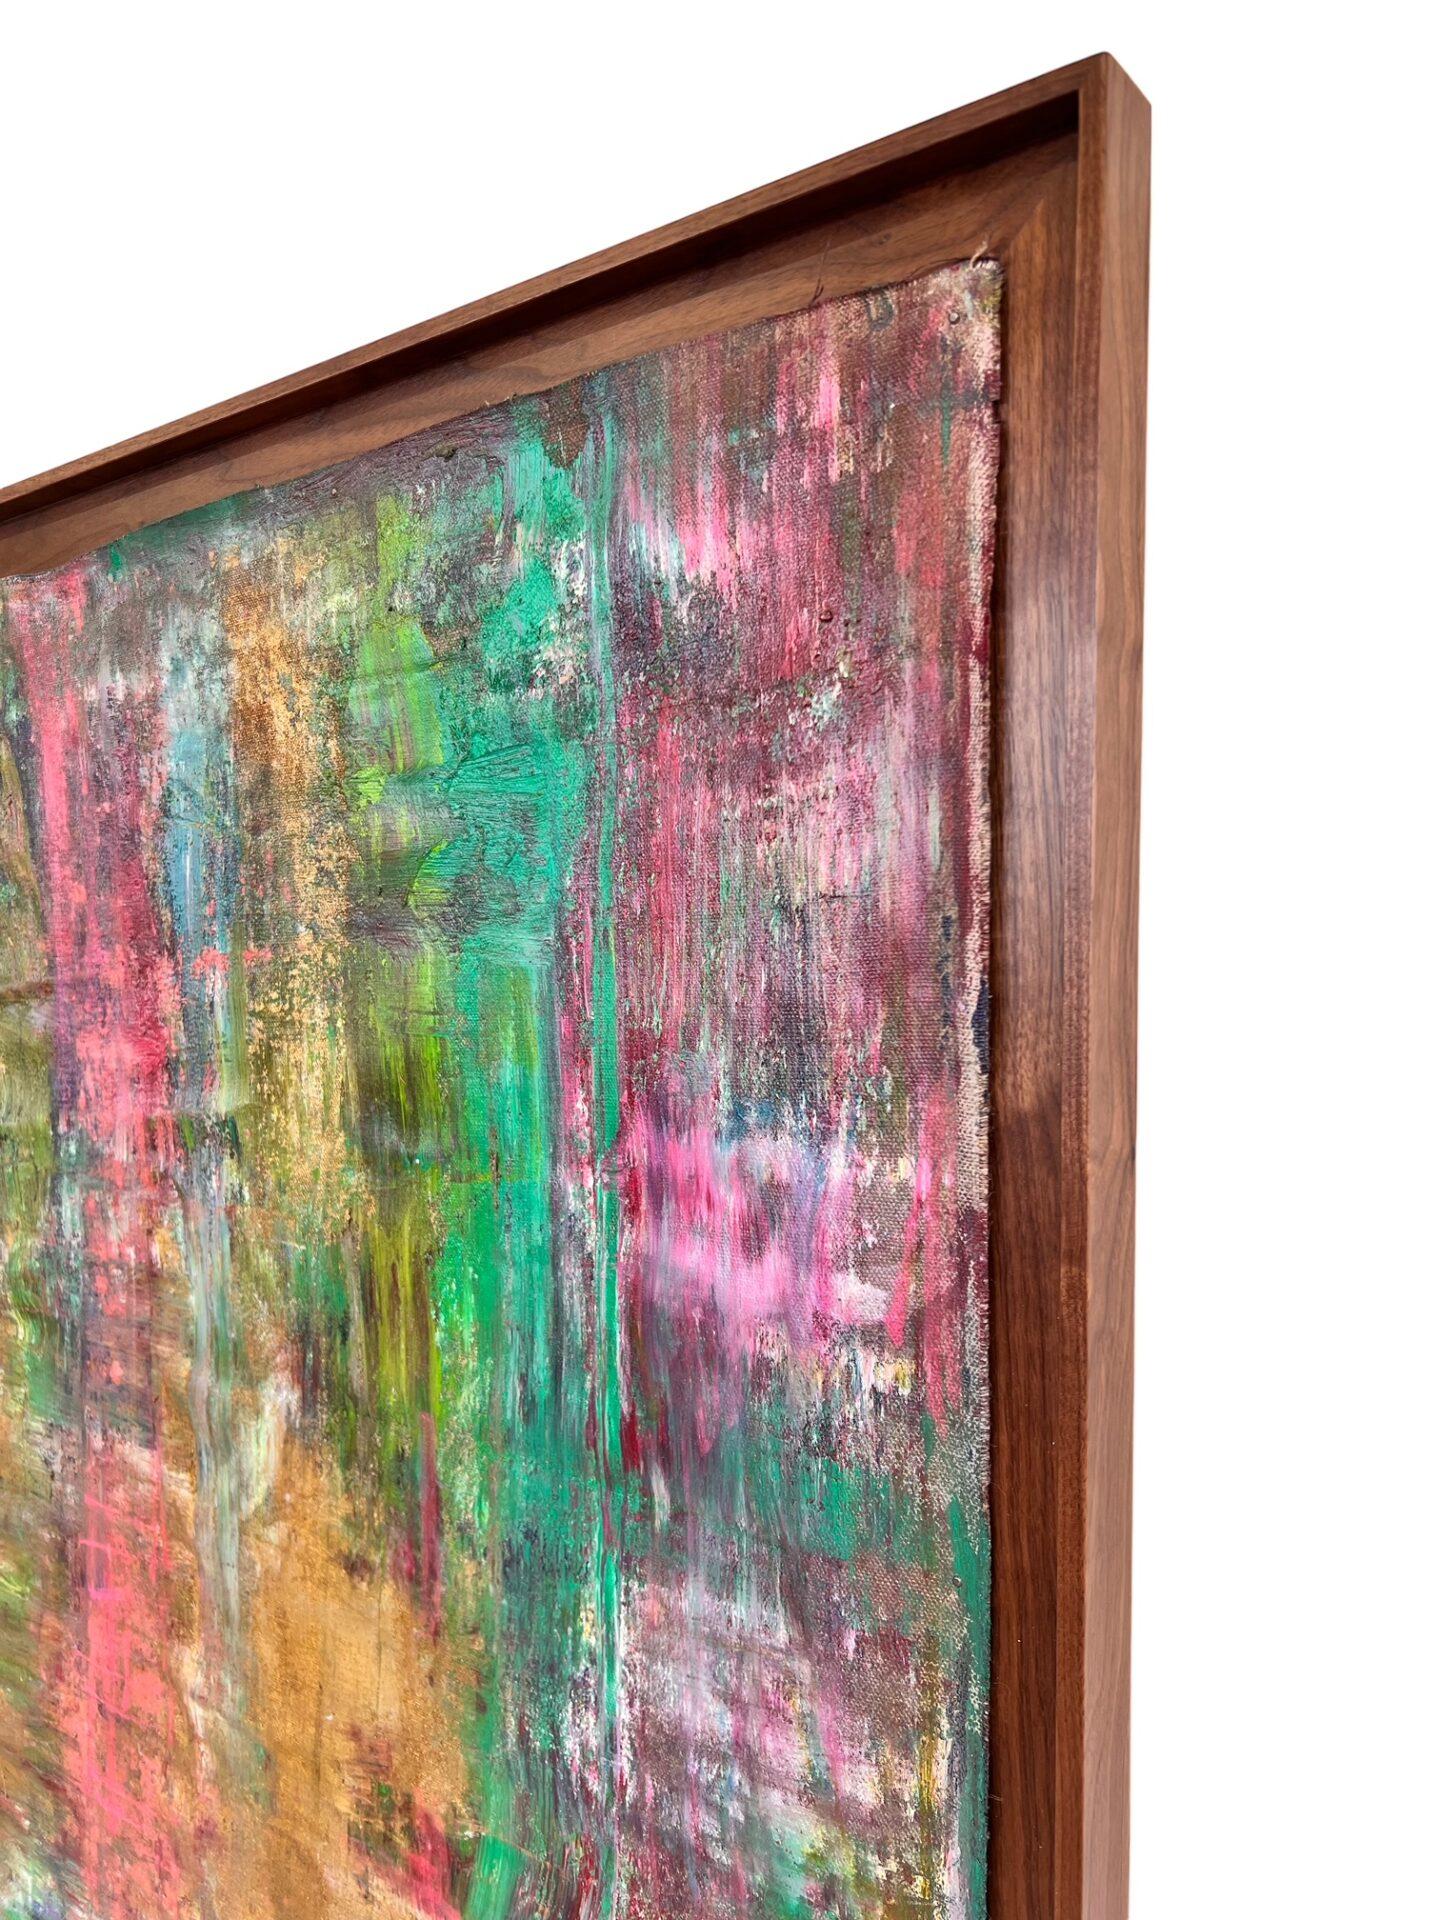 Oil paint and pigments pure Belgian linen. Handcafted wooden frame made of American walnut.
